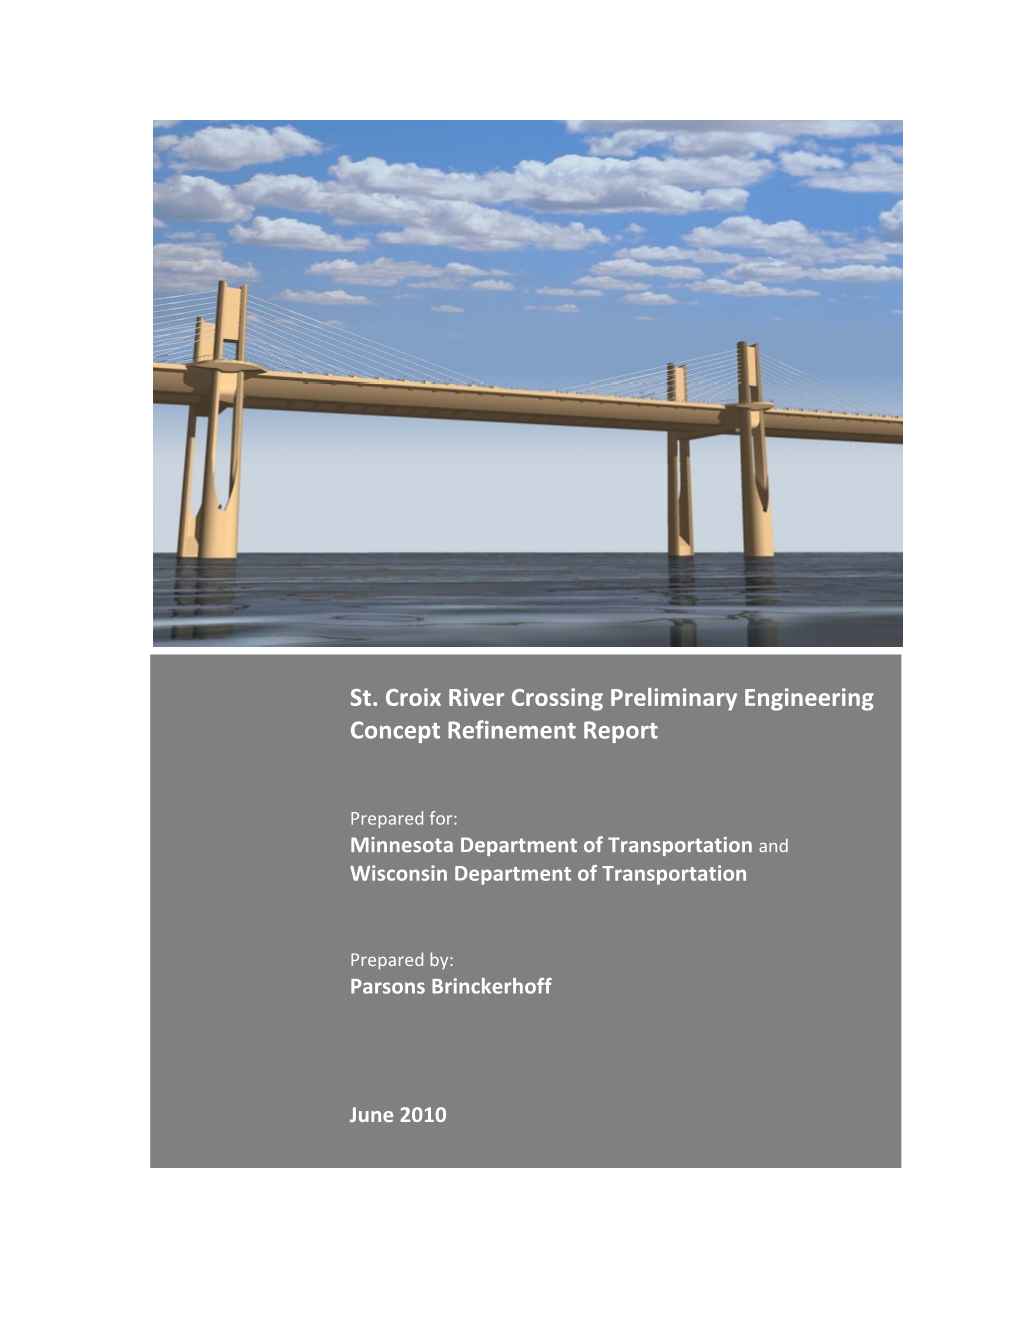 St. Croix River Crossing Preliminary Engineering Concept Refinement Report